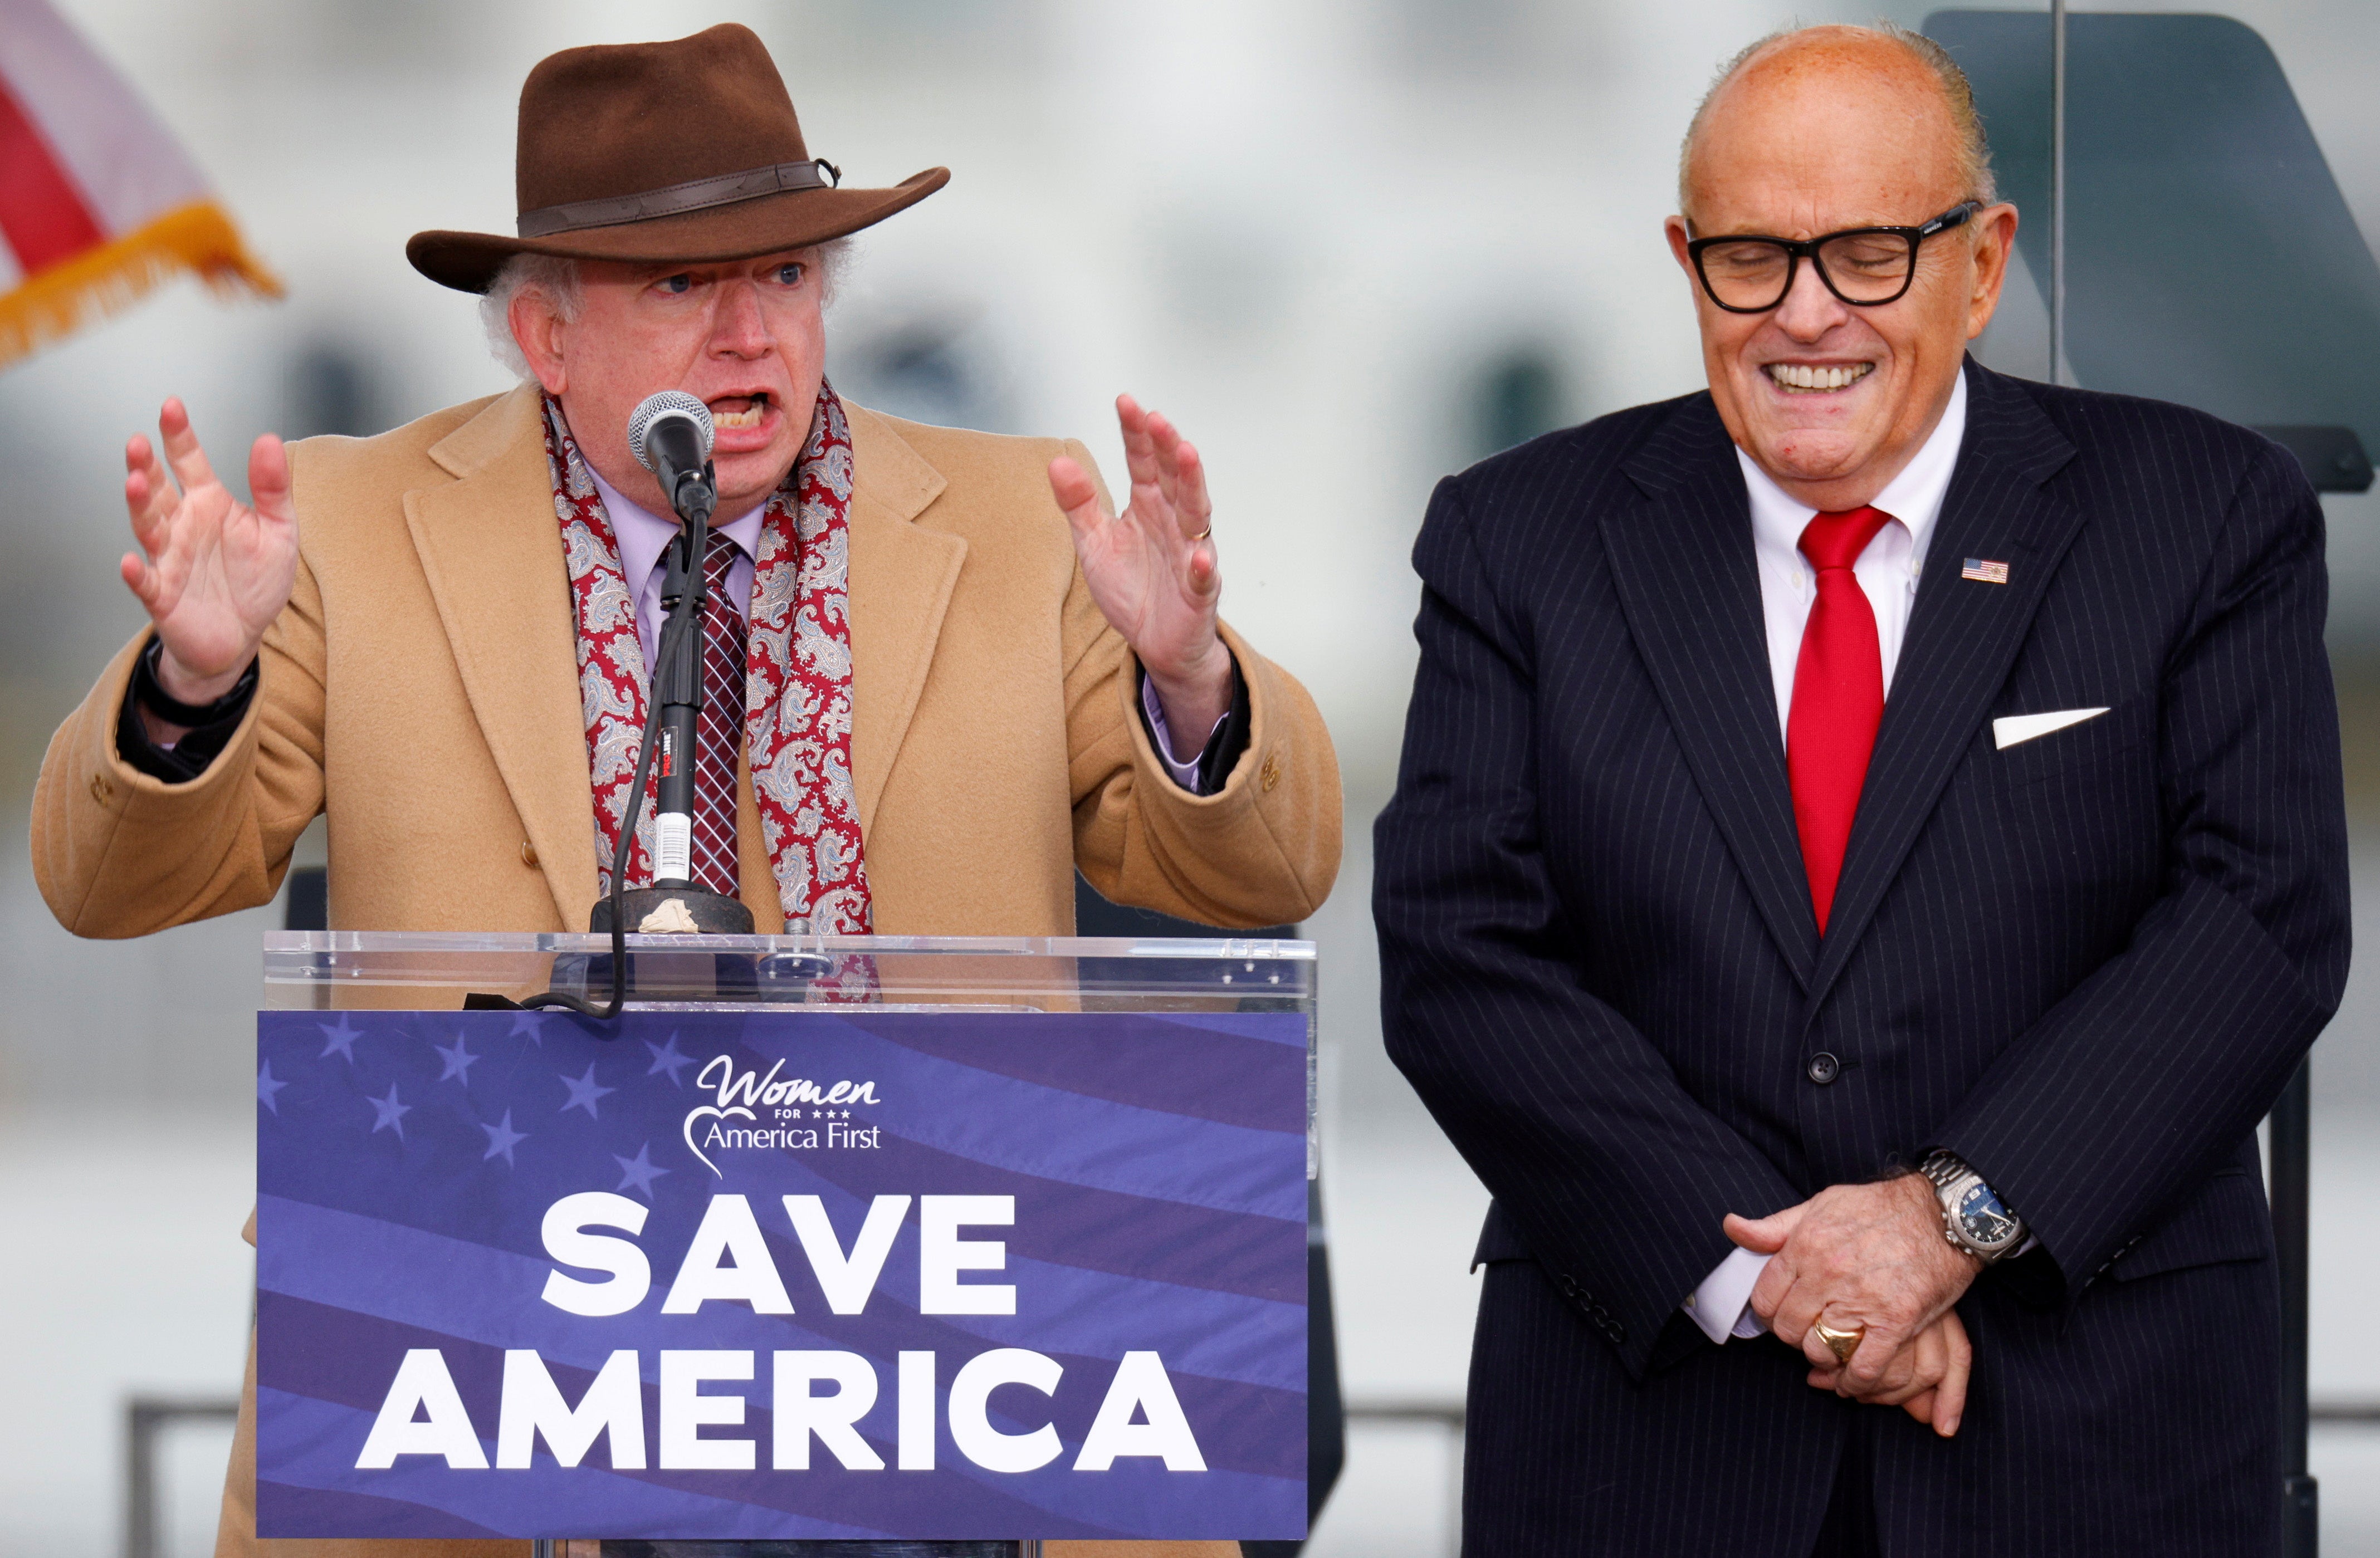 John Eastman, left, and Rudy Giuliani at the Ellipse on January 6 2021. The former mayor’s lawyer called Hutchinson’s accusation a ‘disgusting lie’